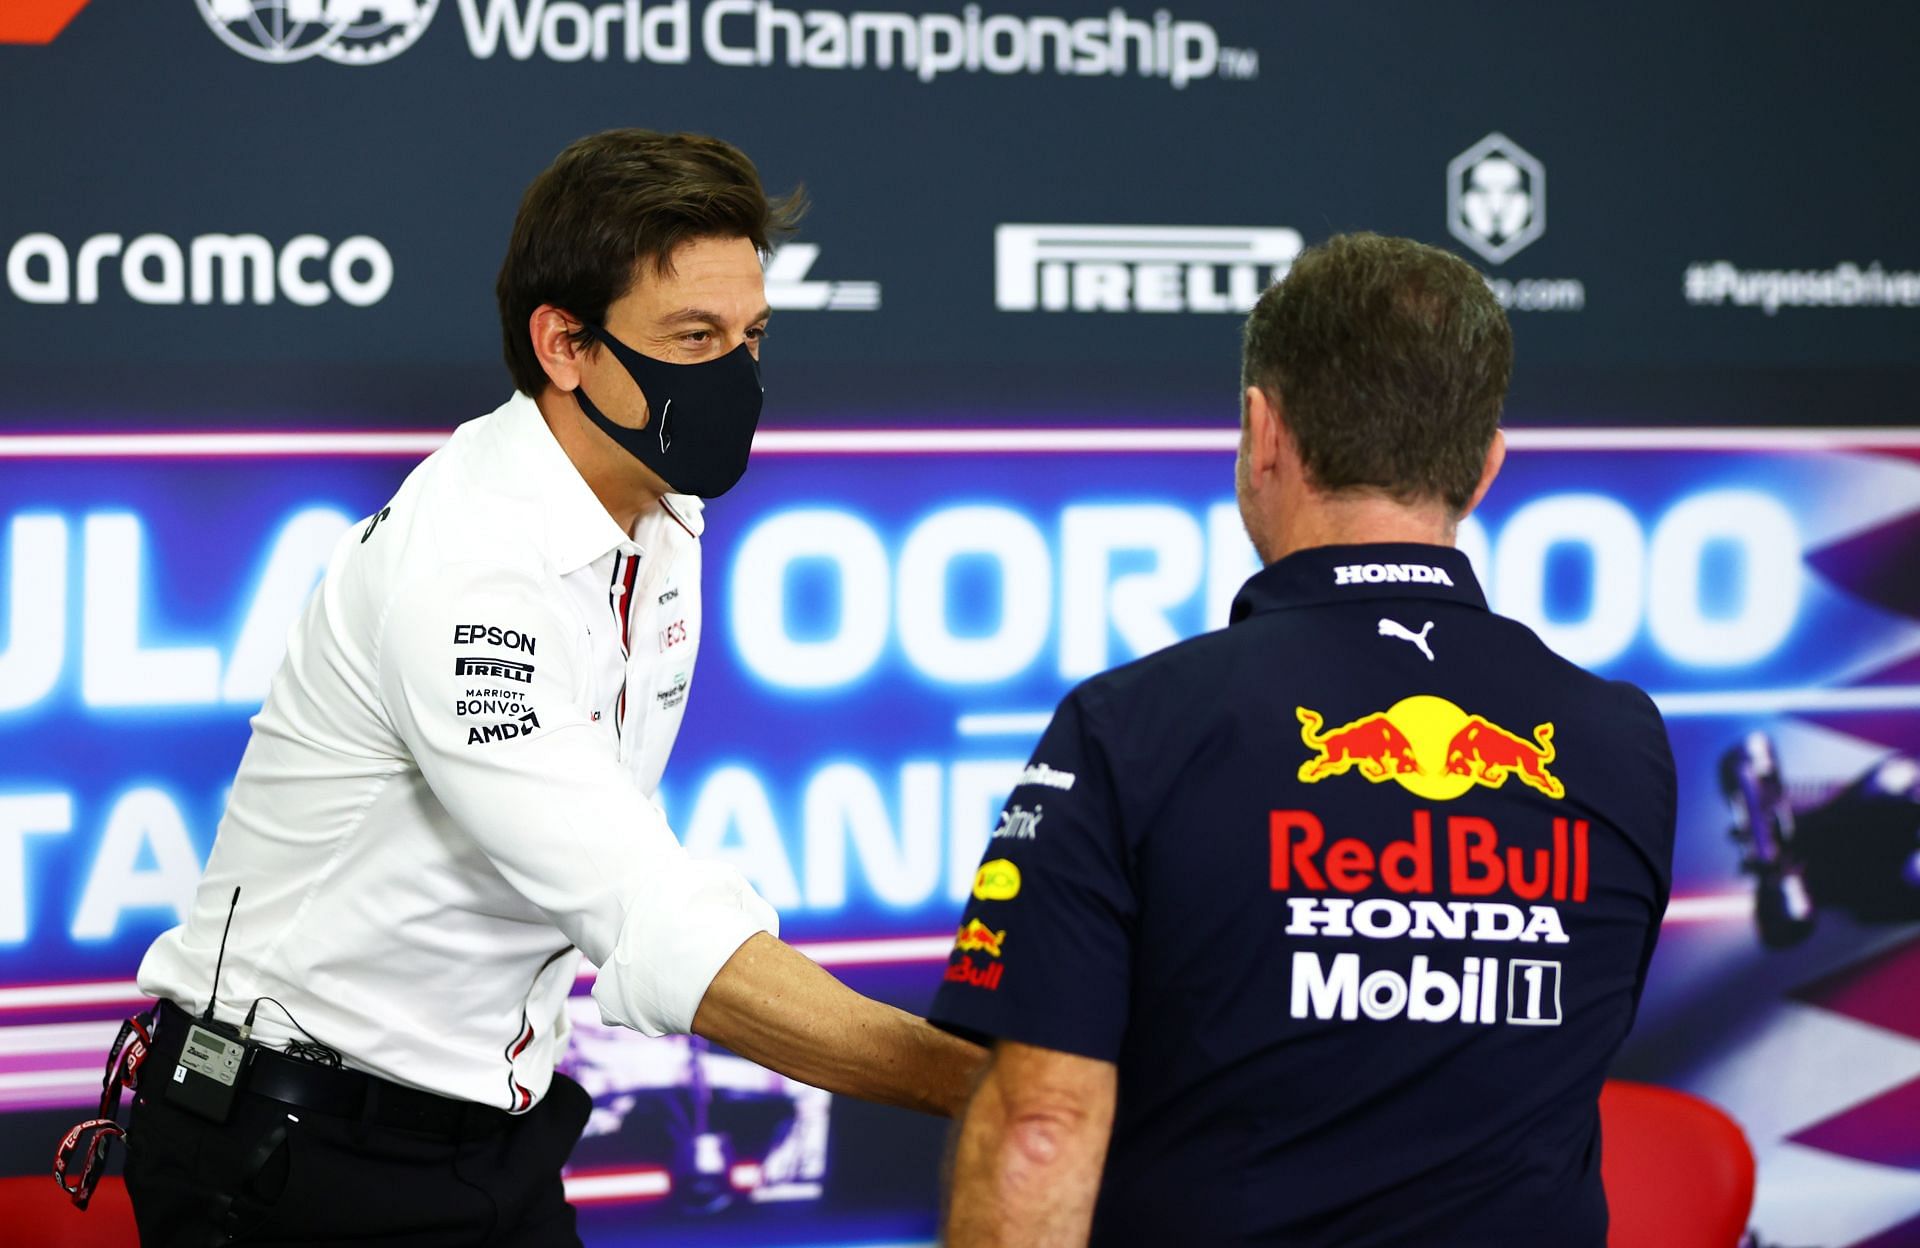 Toto Wolff (left) and Christian Horner (right) during the Press Conference at the 2021 Qatar GP